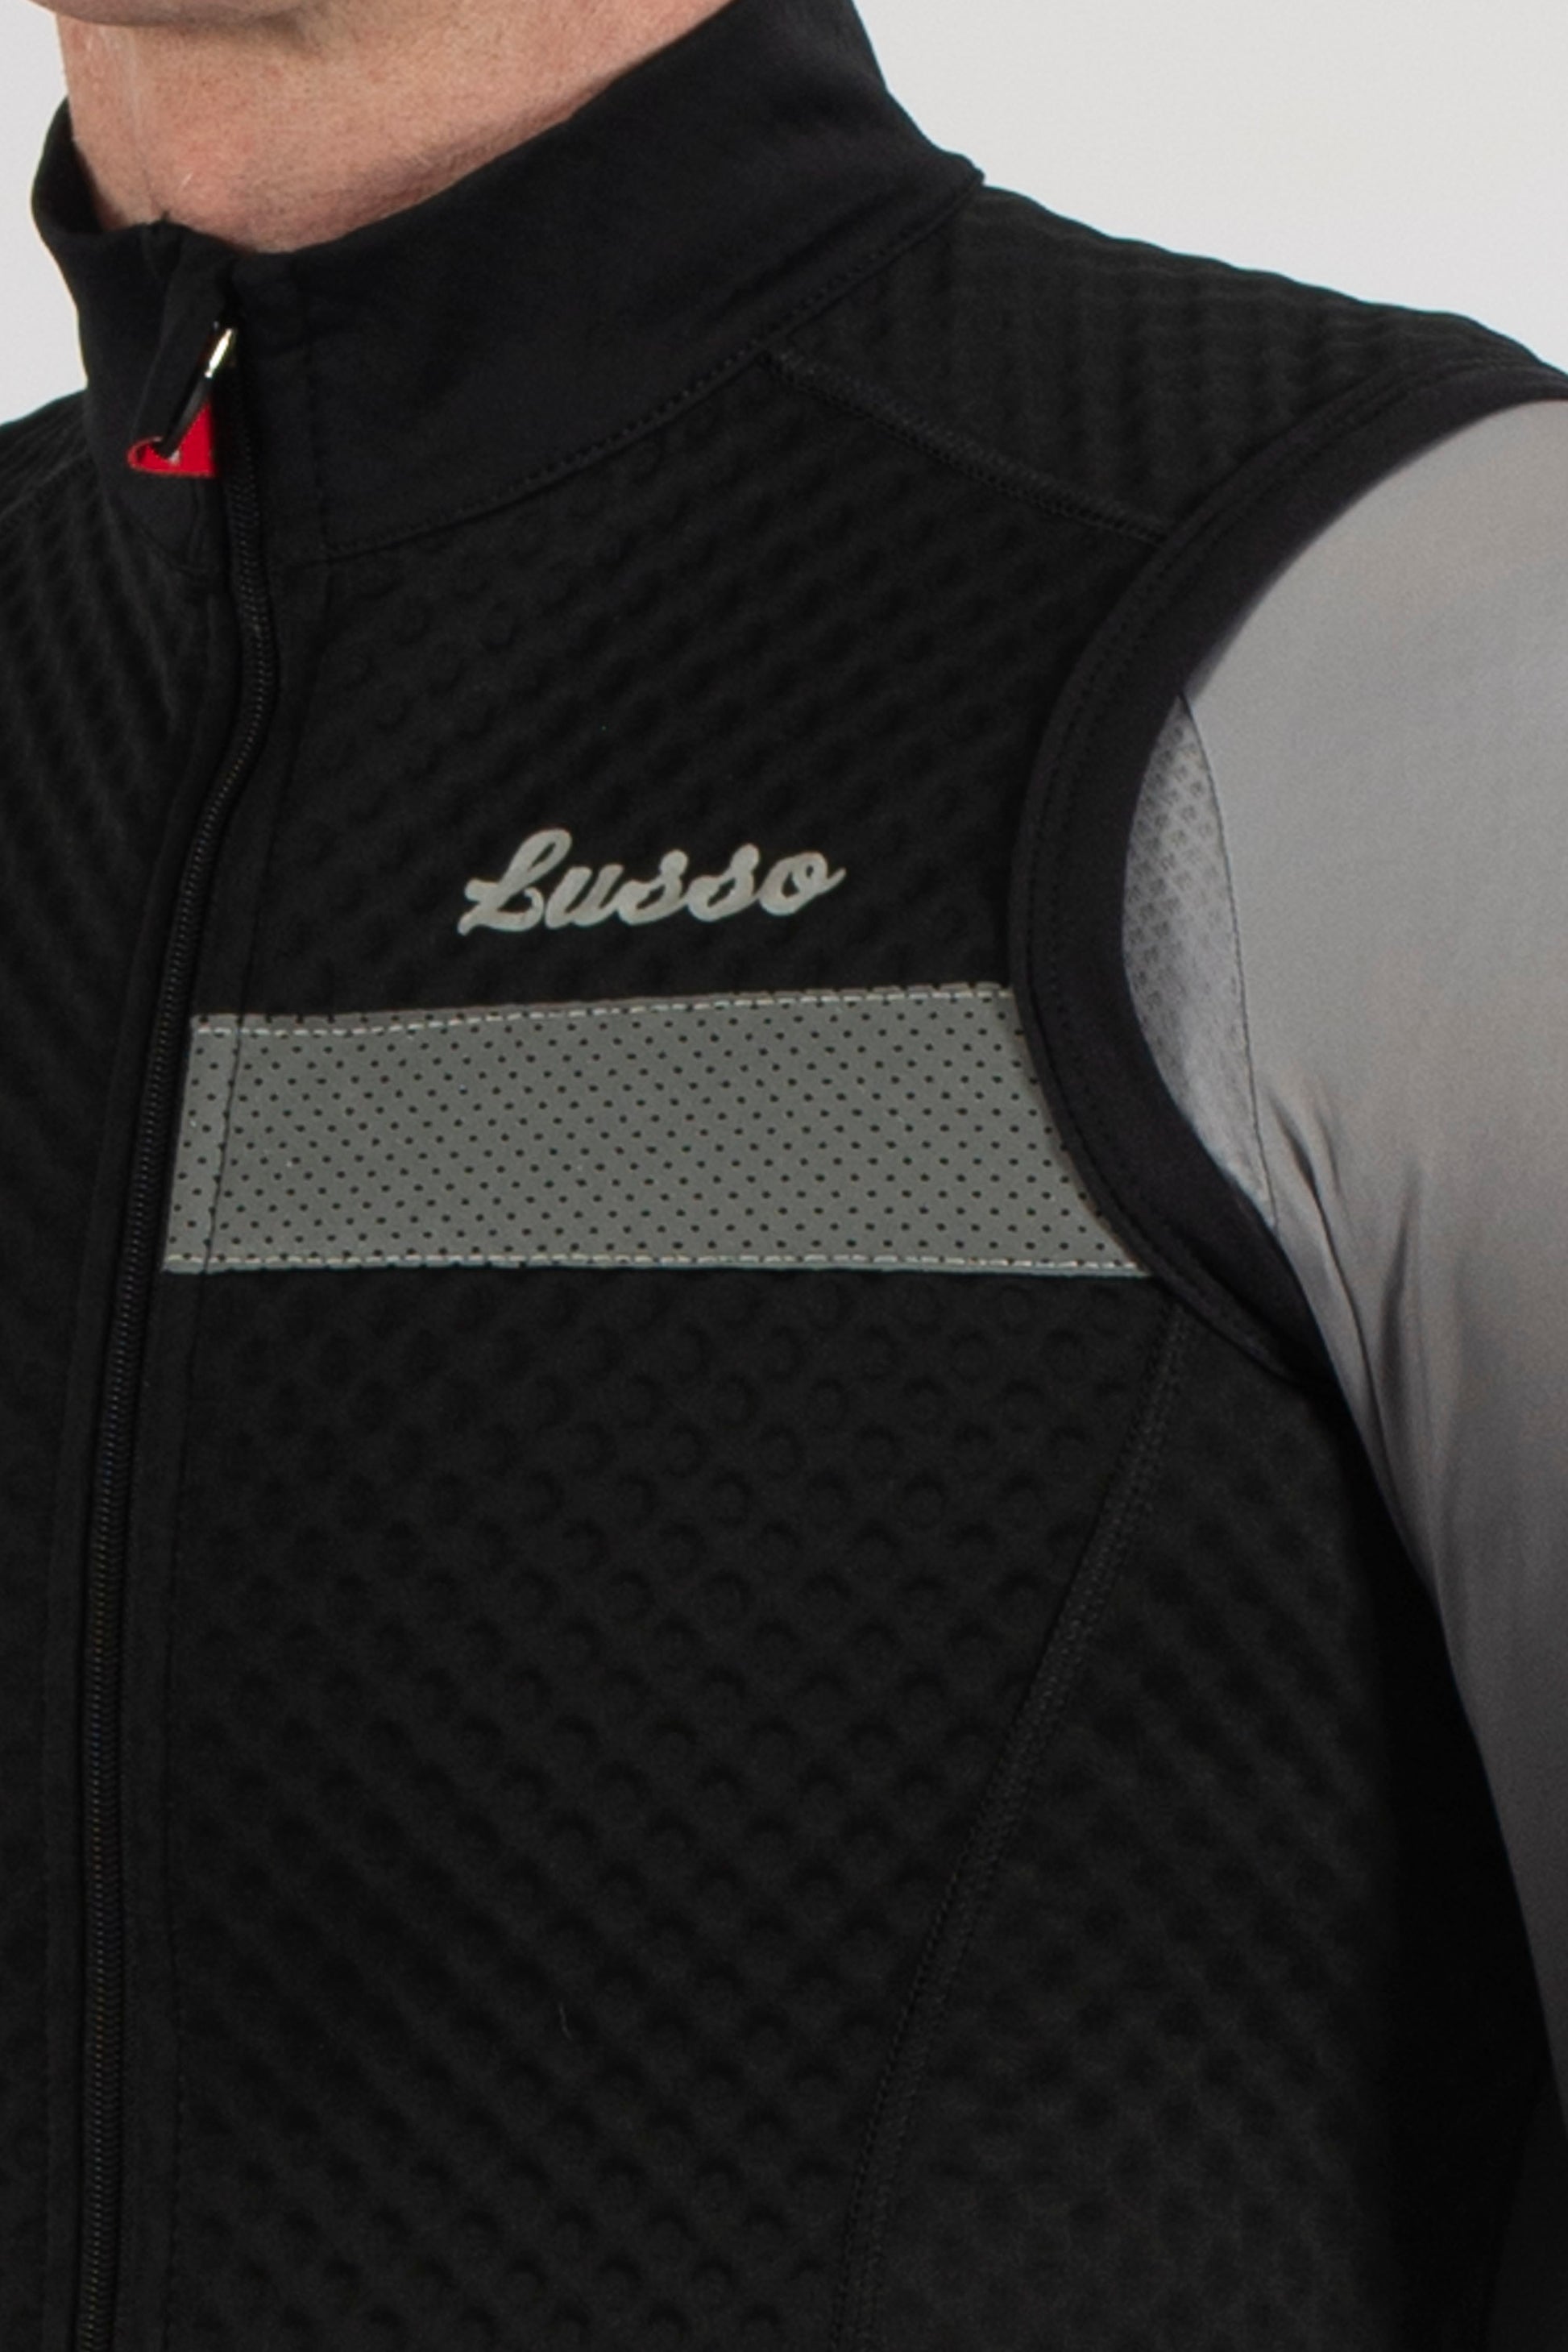 Essential Thermal Gilet - Lusso Cycle Wear